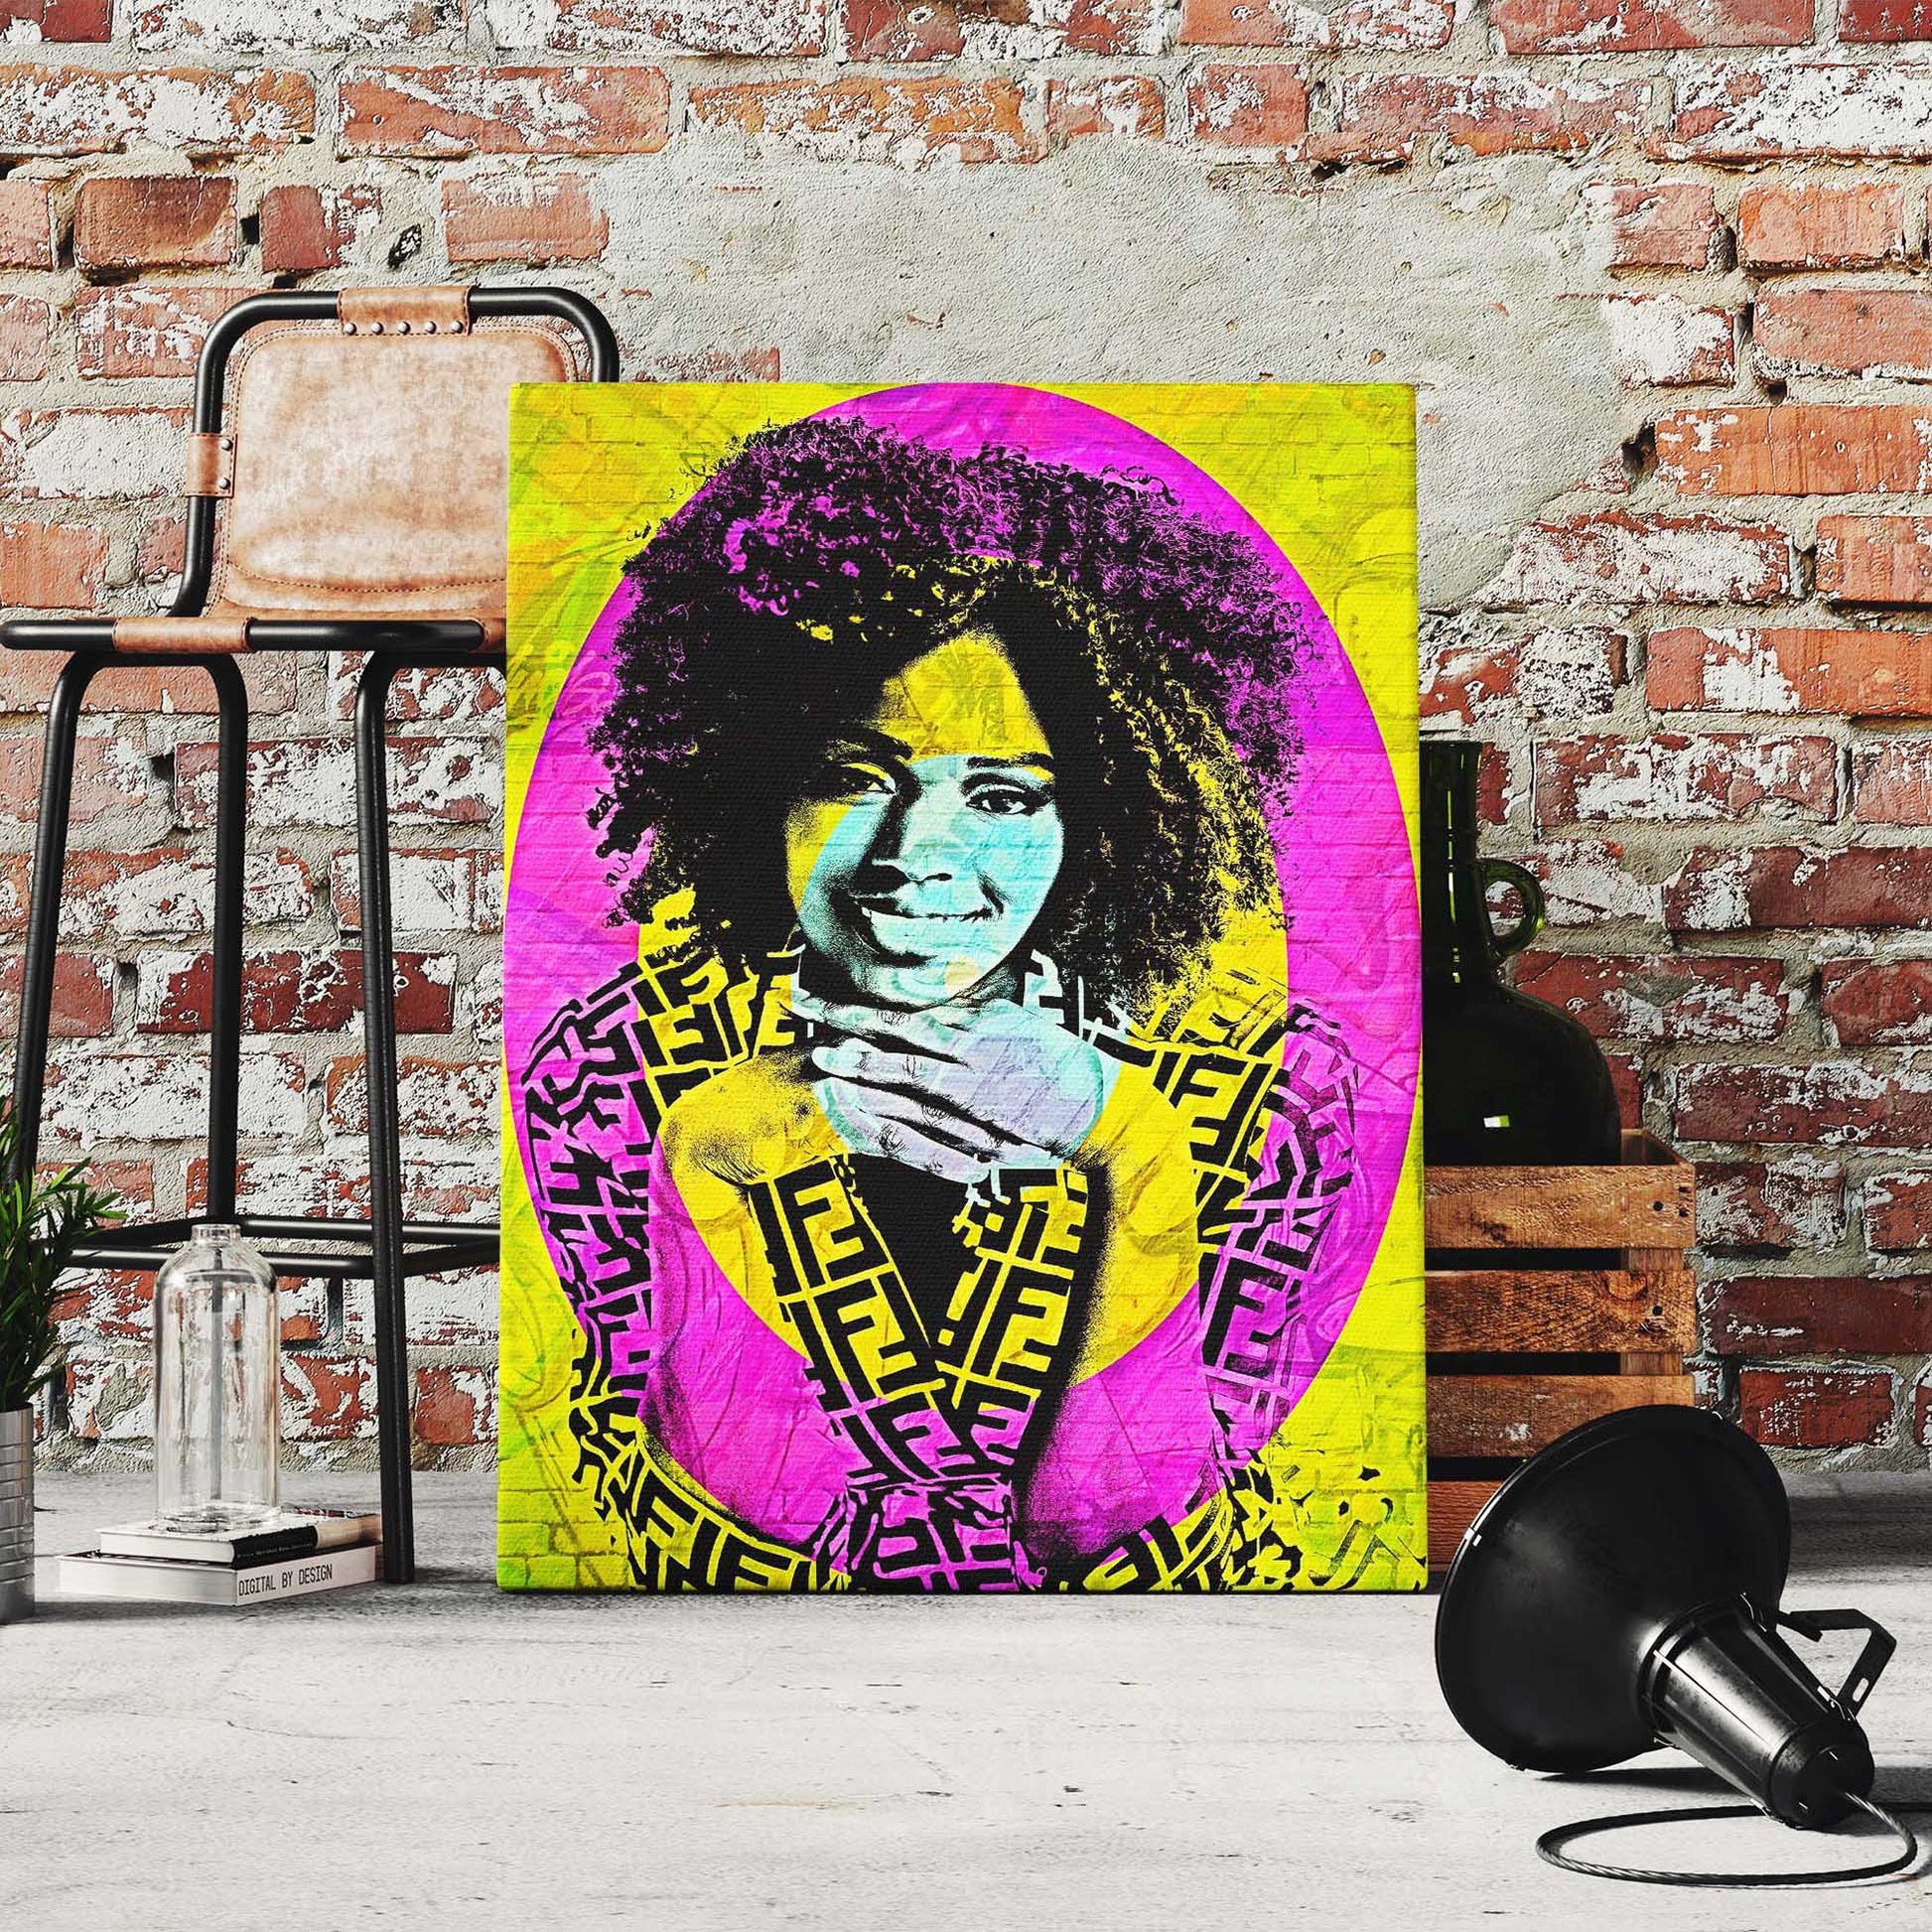 Immerse yourself in the world of urban art with our Personalised Graffiti Street Art Canvas. Its fun, colorful, and exciting designs create a vibrant and dynamic atmosphere. Handmade on woven canvas and printed from your photo